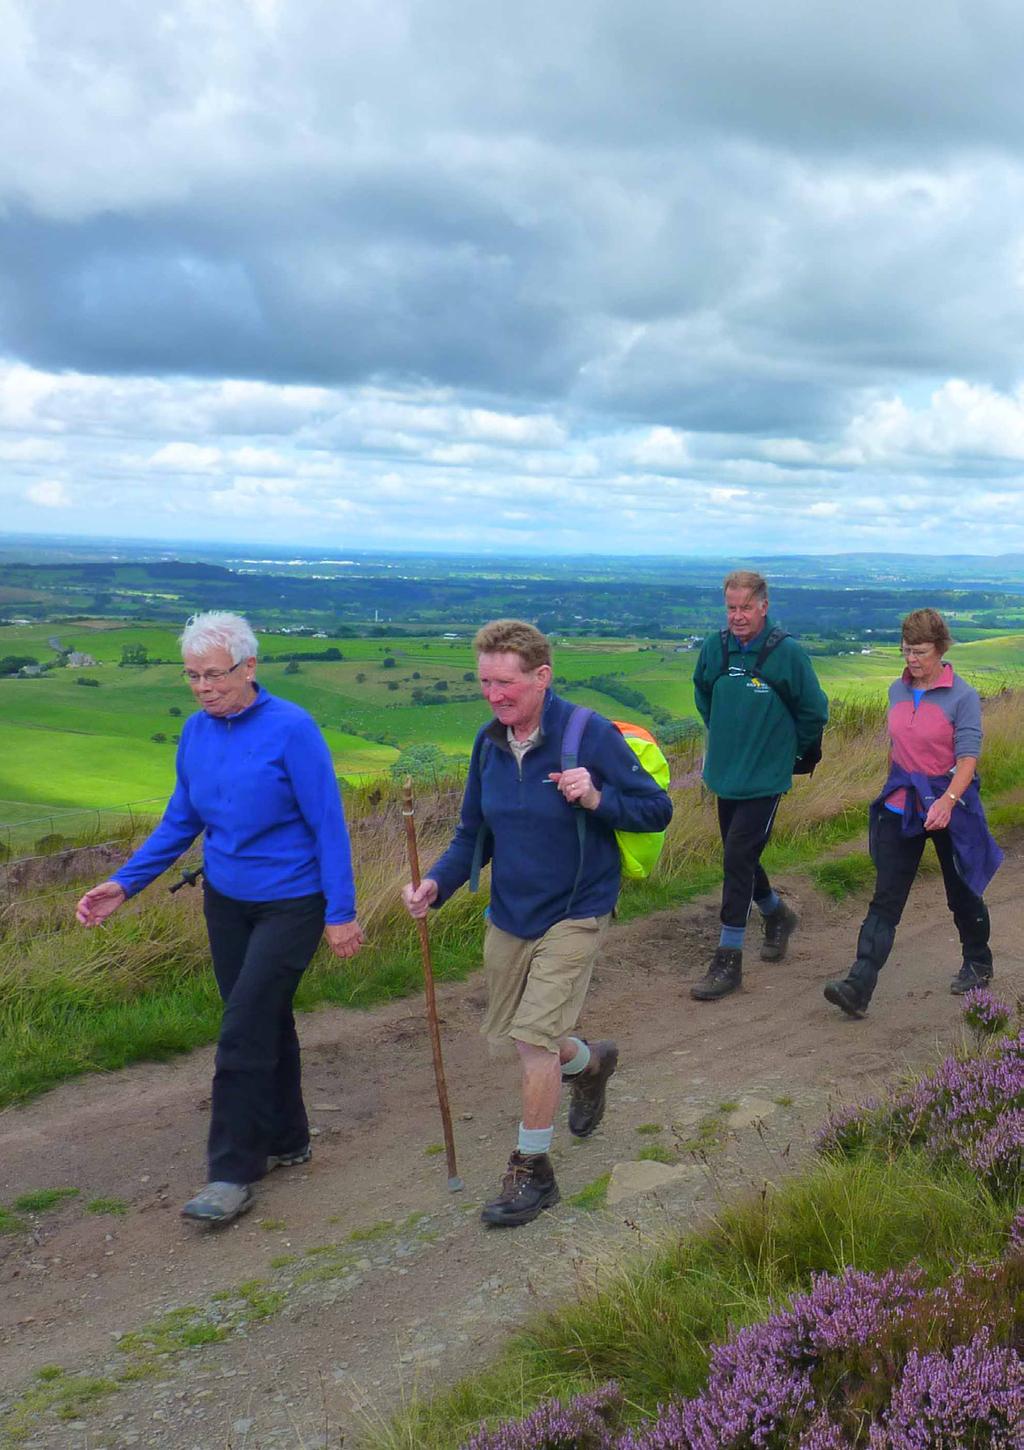 FRIDAY continued... 11:00 am ACCESS ABILITY WALKS. An ideal beginners walk an easy pace and accessible for all. Lasts approximately 45 to 60 minutes.